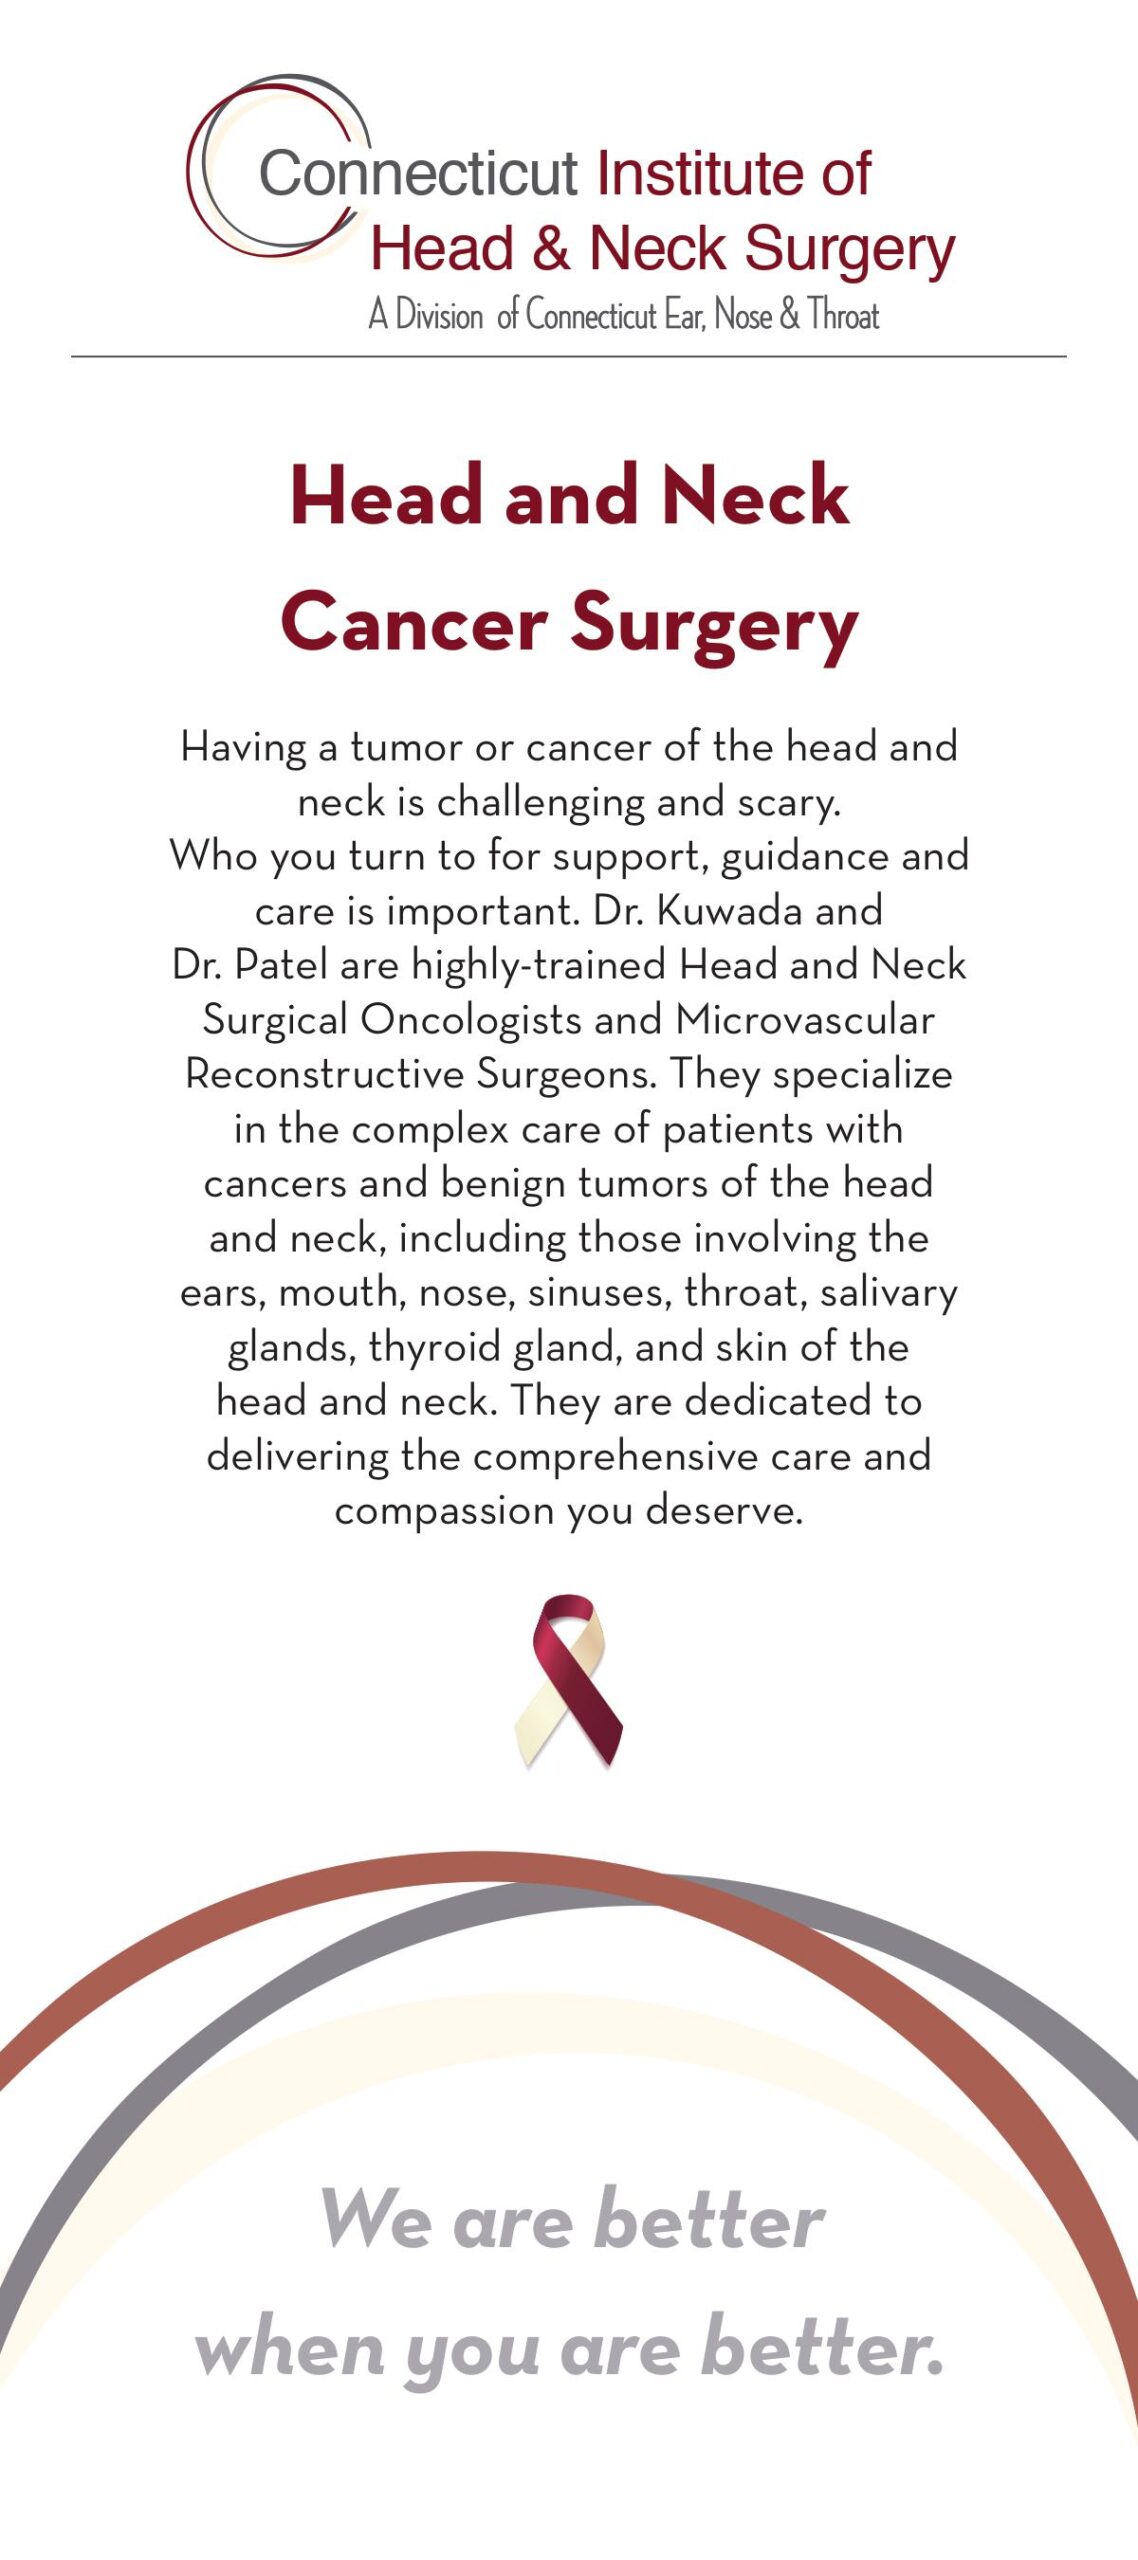 Head and Neck Cancer Surgery